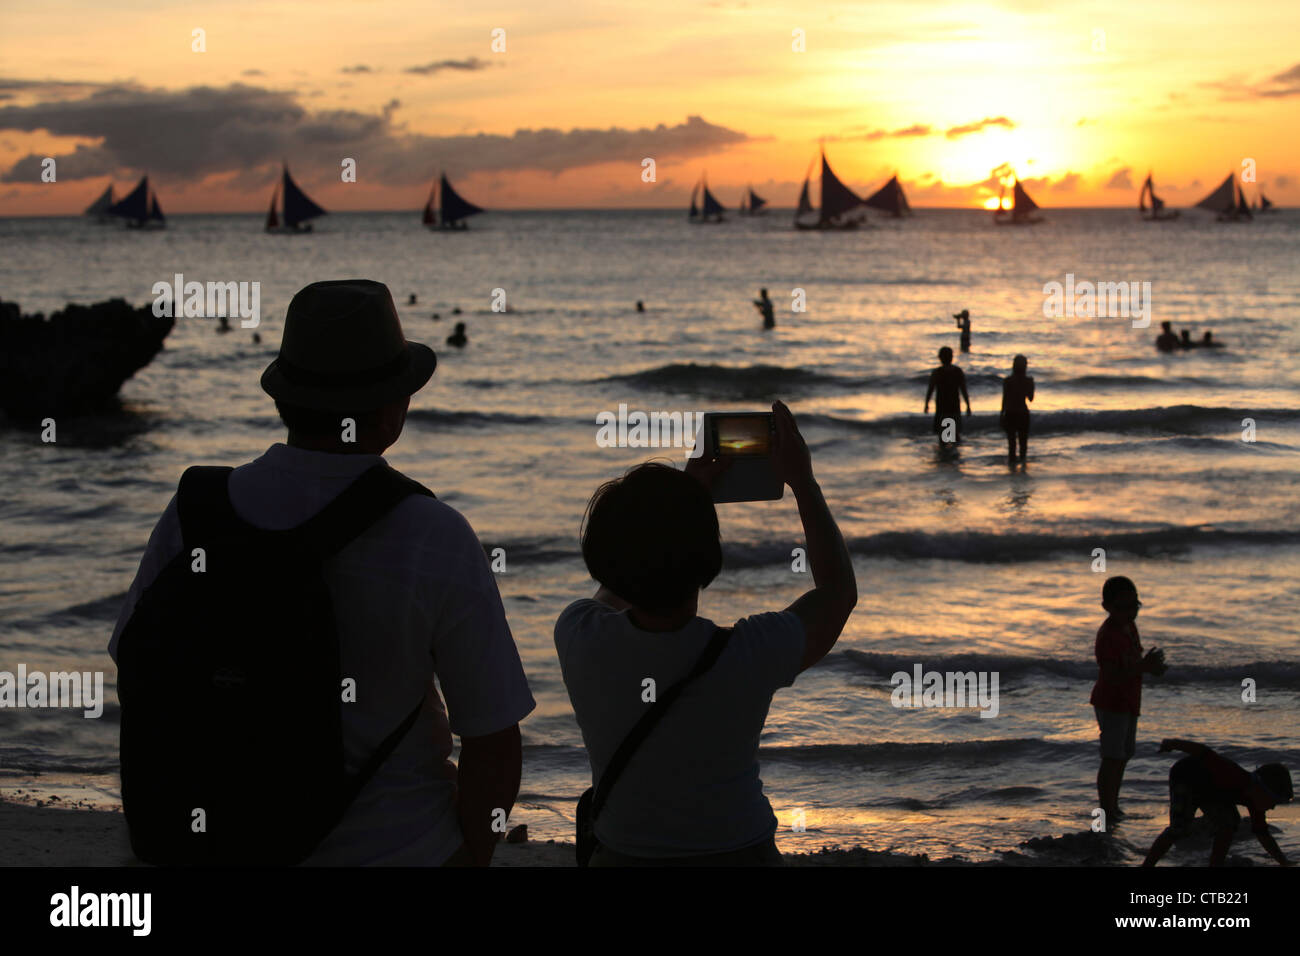 Two tourists making pictures at sunset, Boracay, Panay Island, Visayas, Philippines Stock Photo